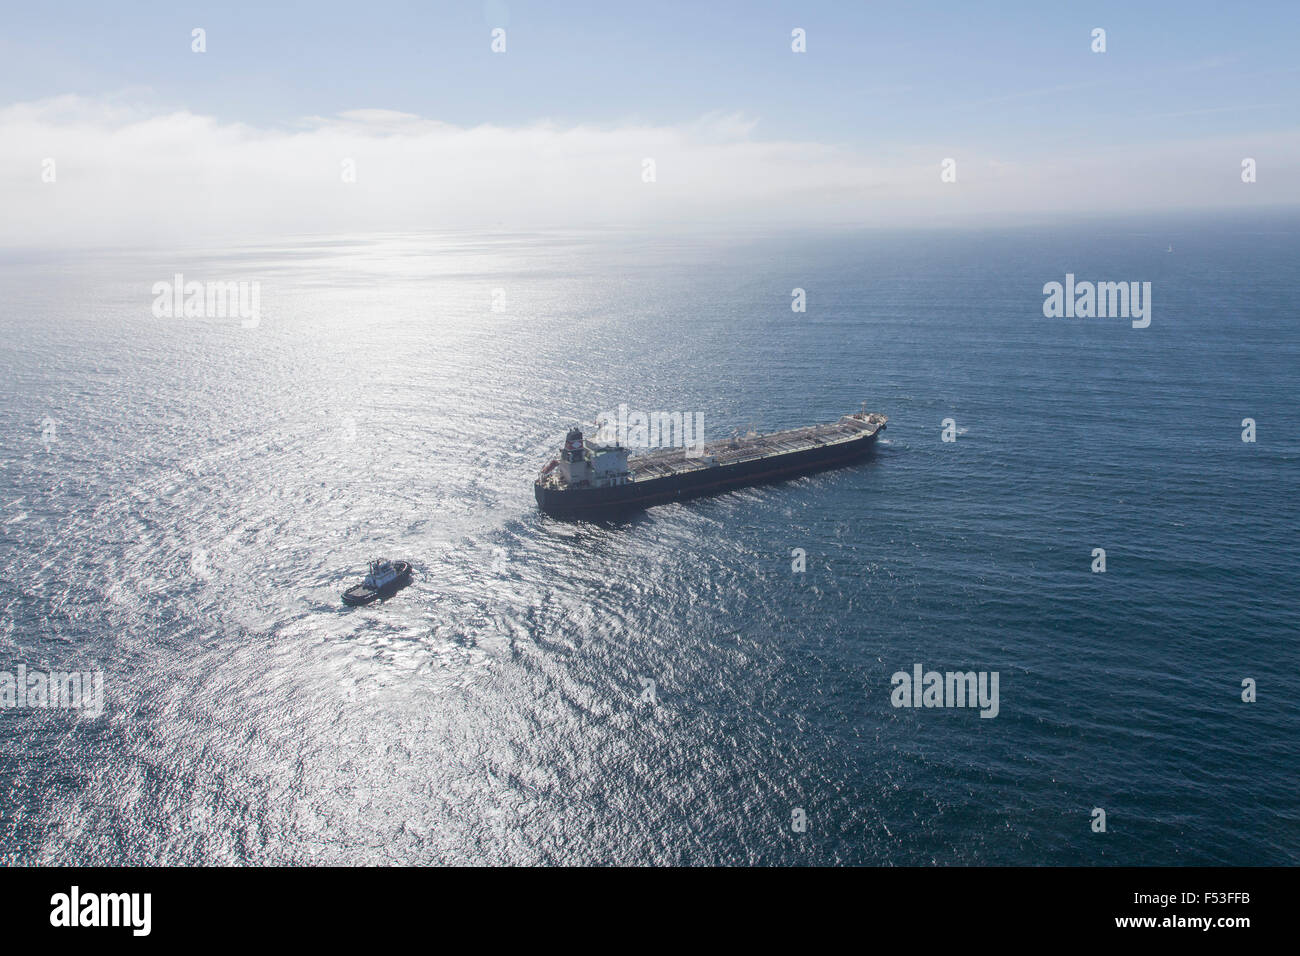 oil tanker freighter at sea with tug boat assist Stock Photo